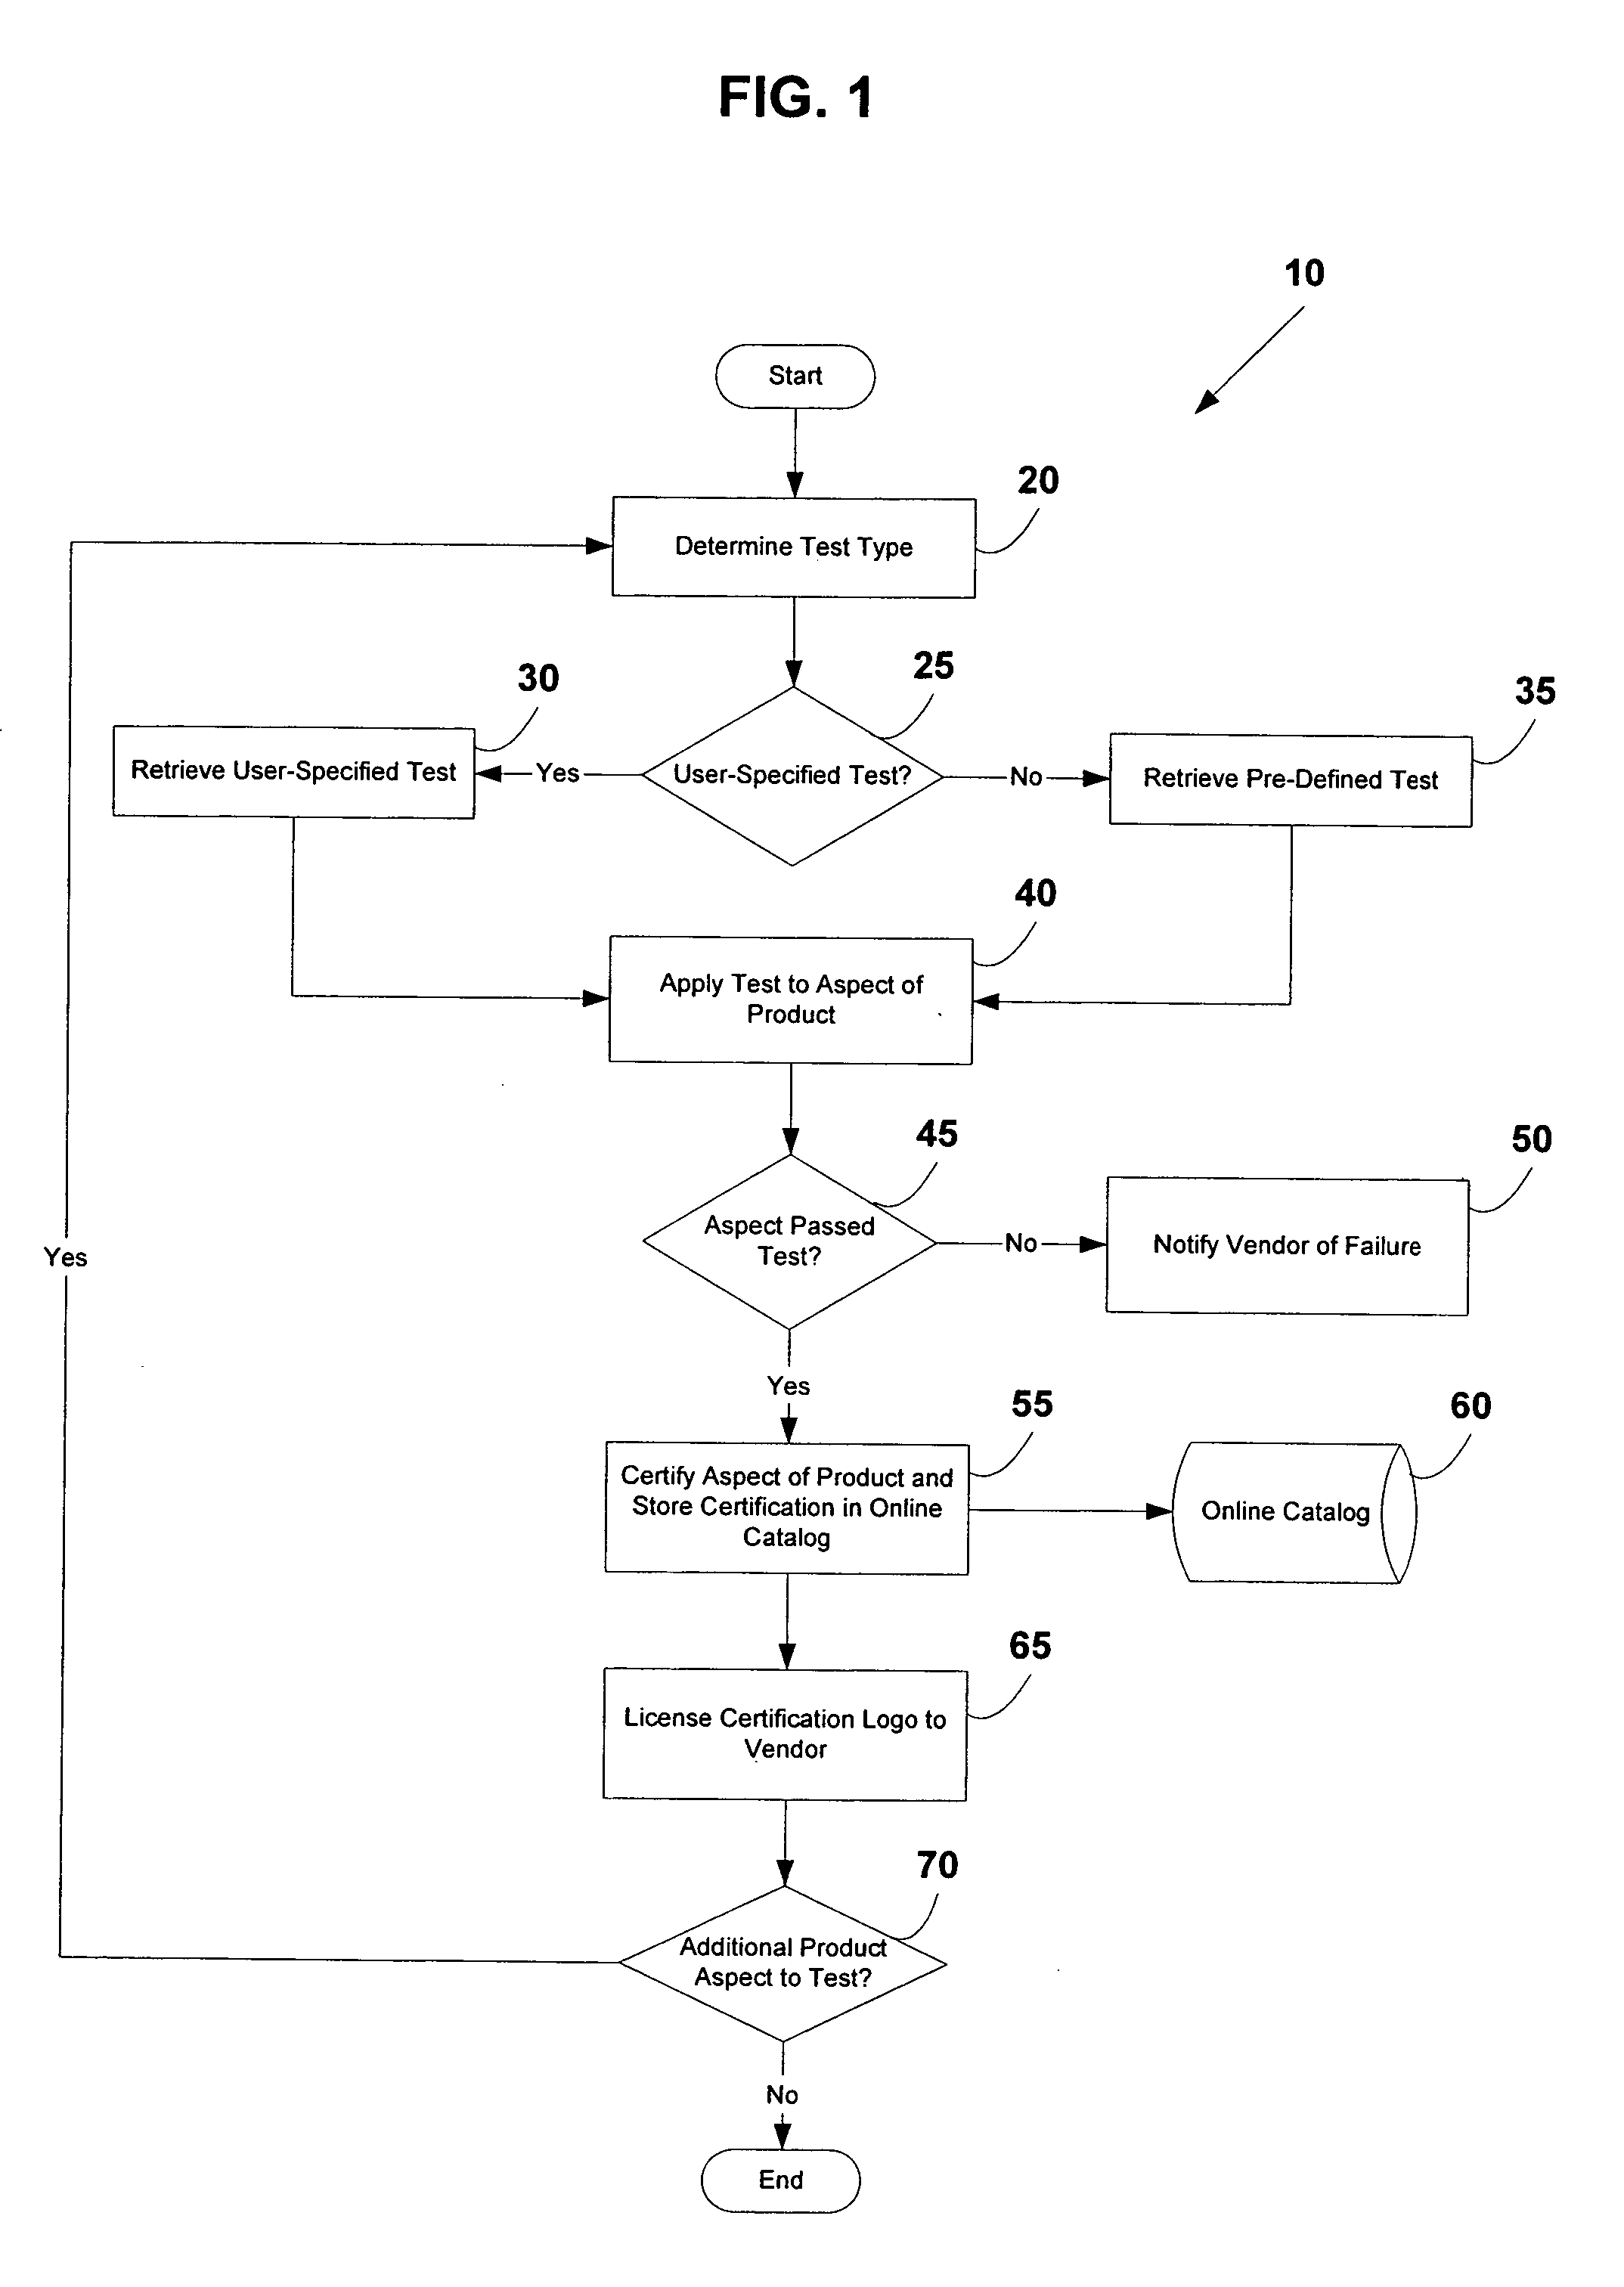 System and method for testing and certifying products